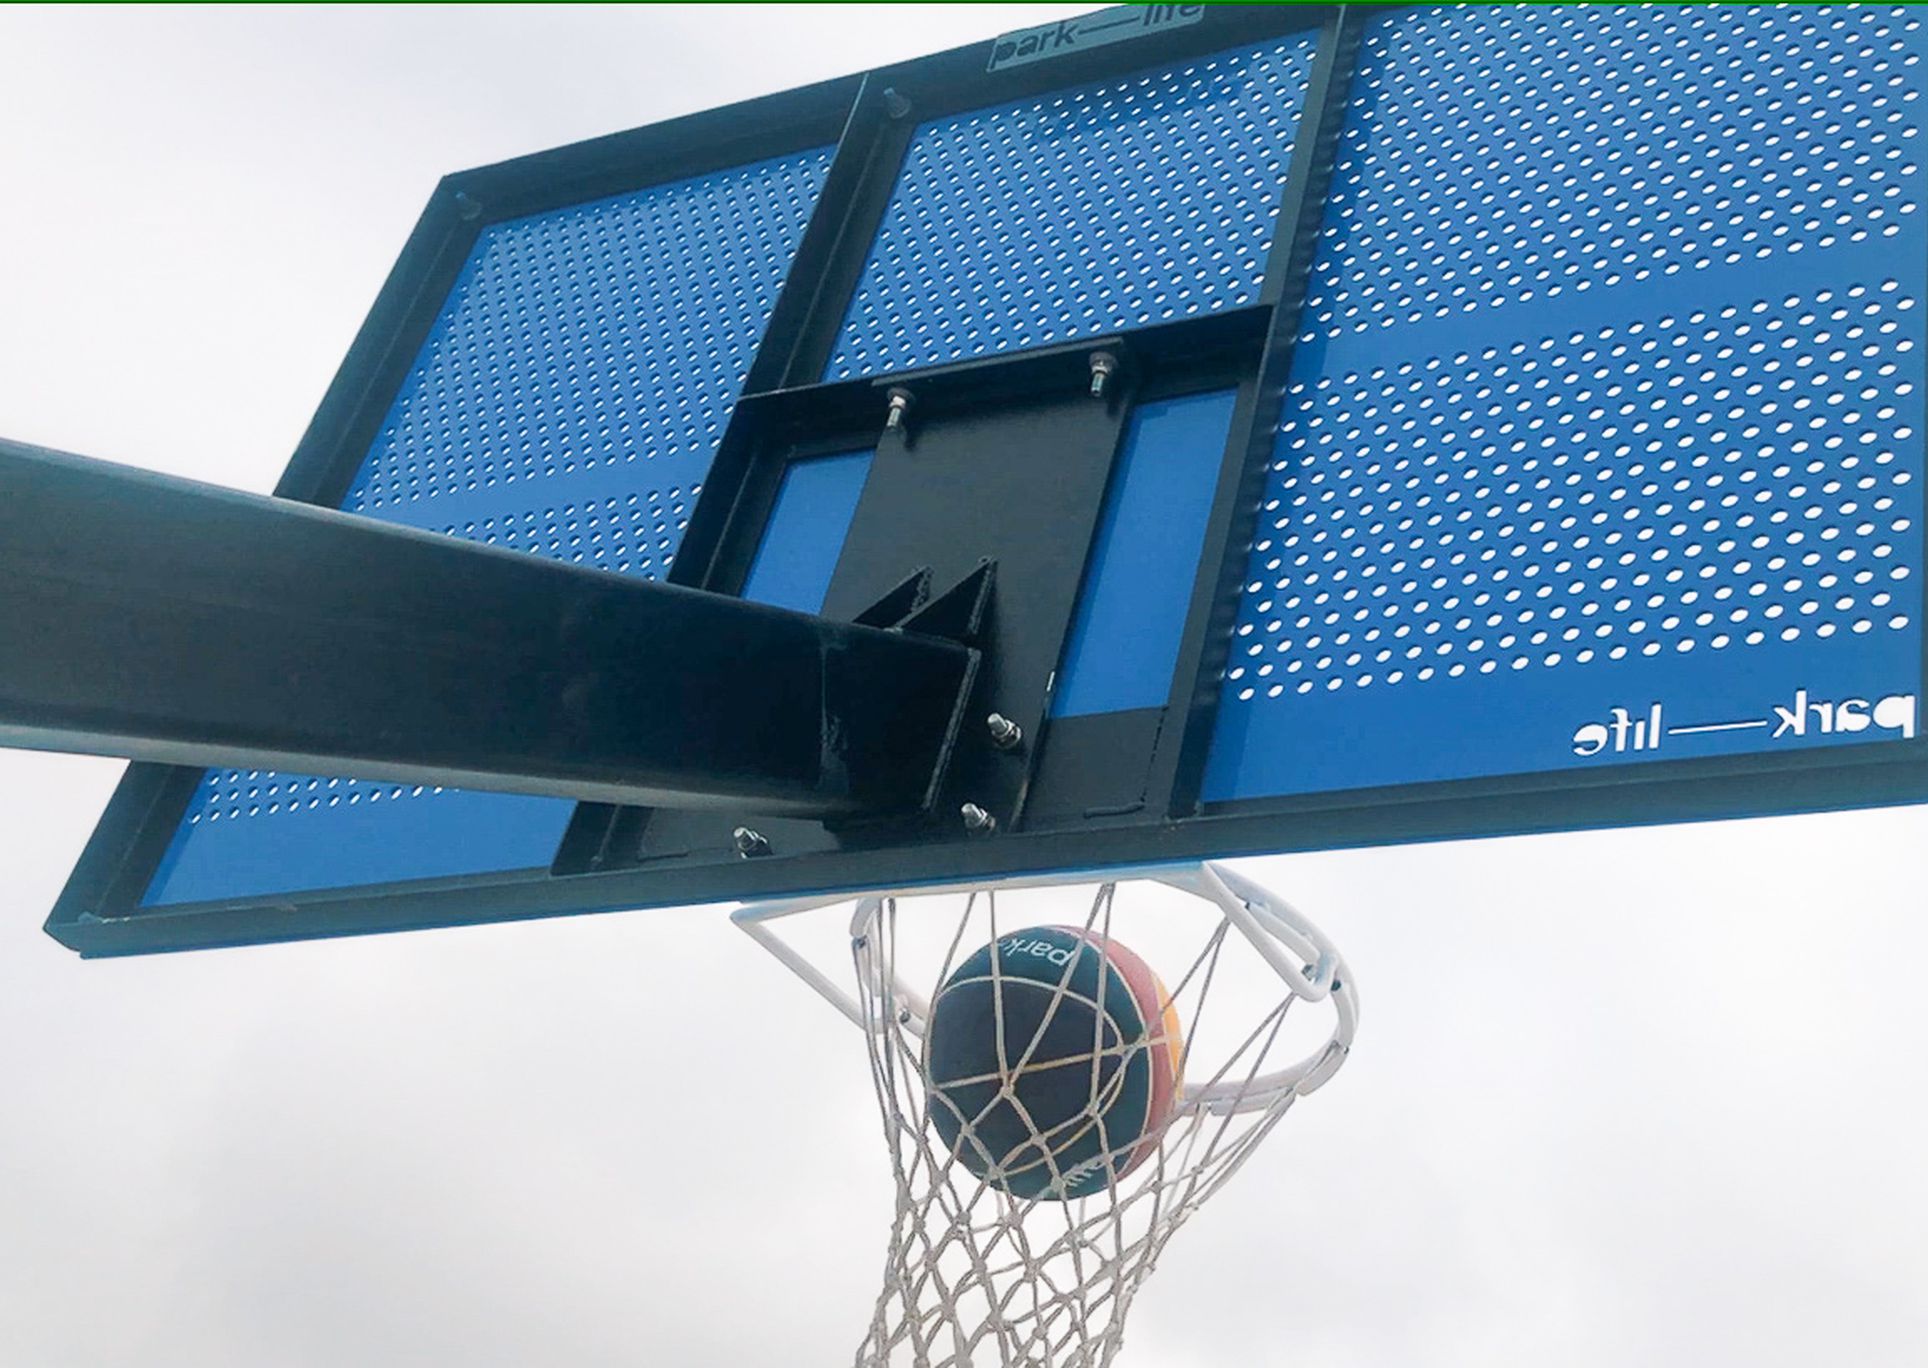 Grizzly Basketball Hoop, Acland Park, Made in NZ